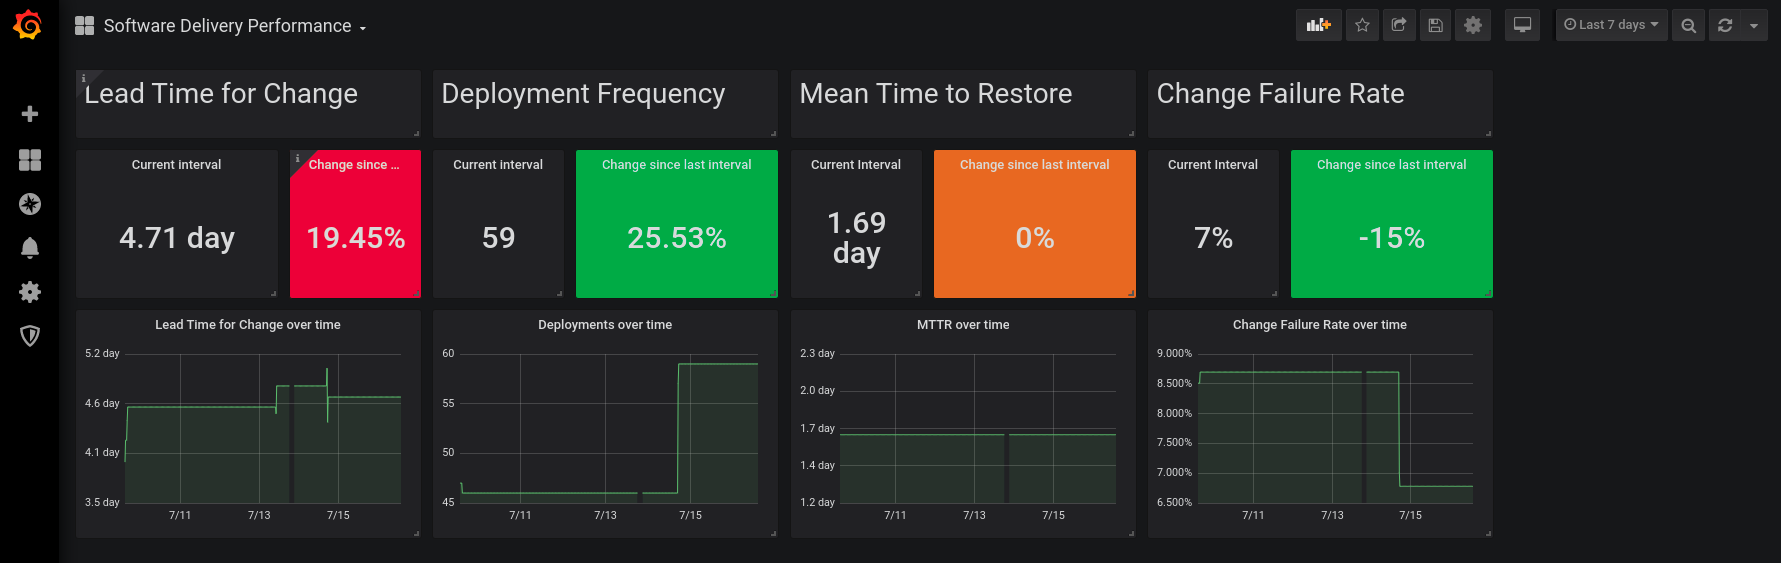 Software Delivery Metrics Dashboard